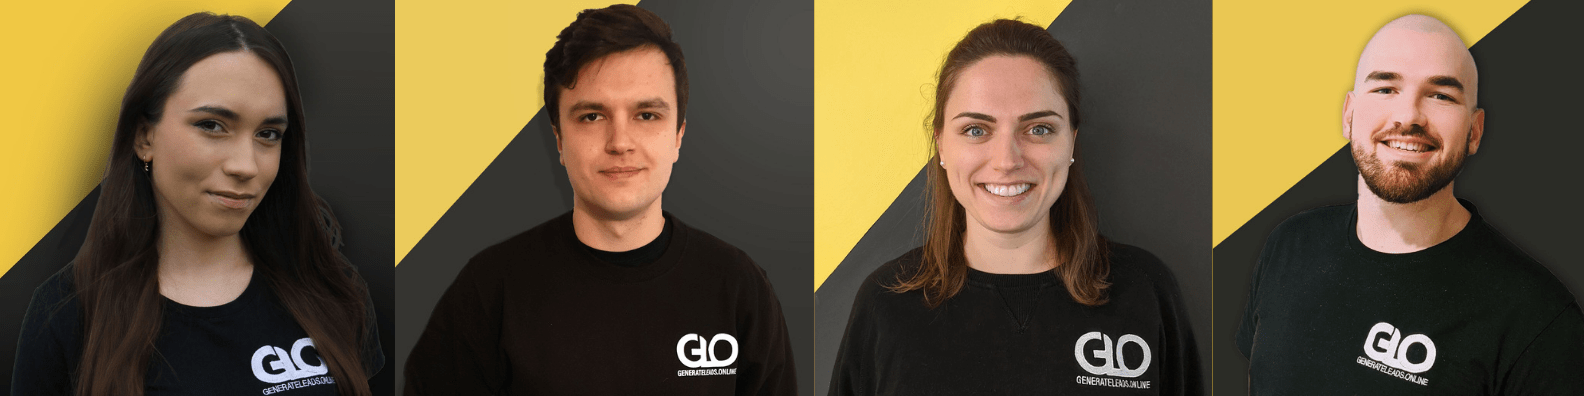 Suffolk digital agency builds remote team with degree apprenticeships